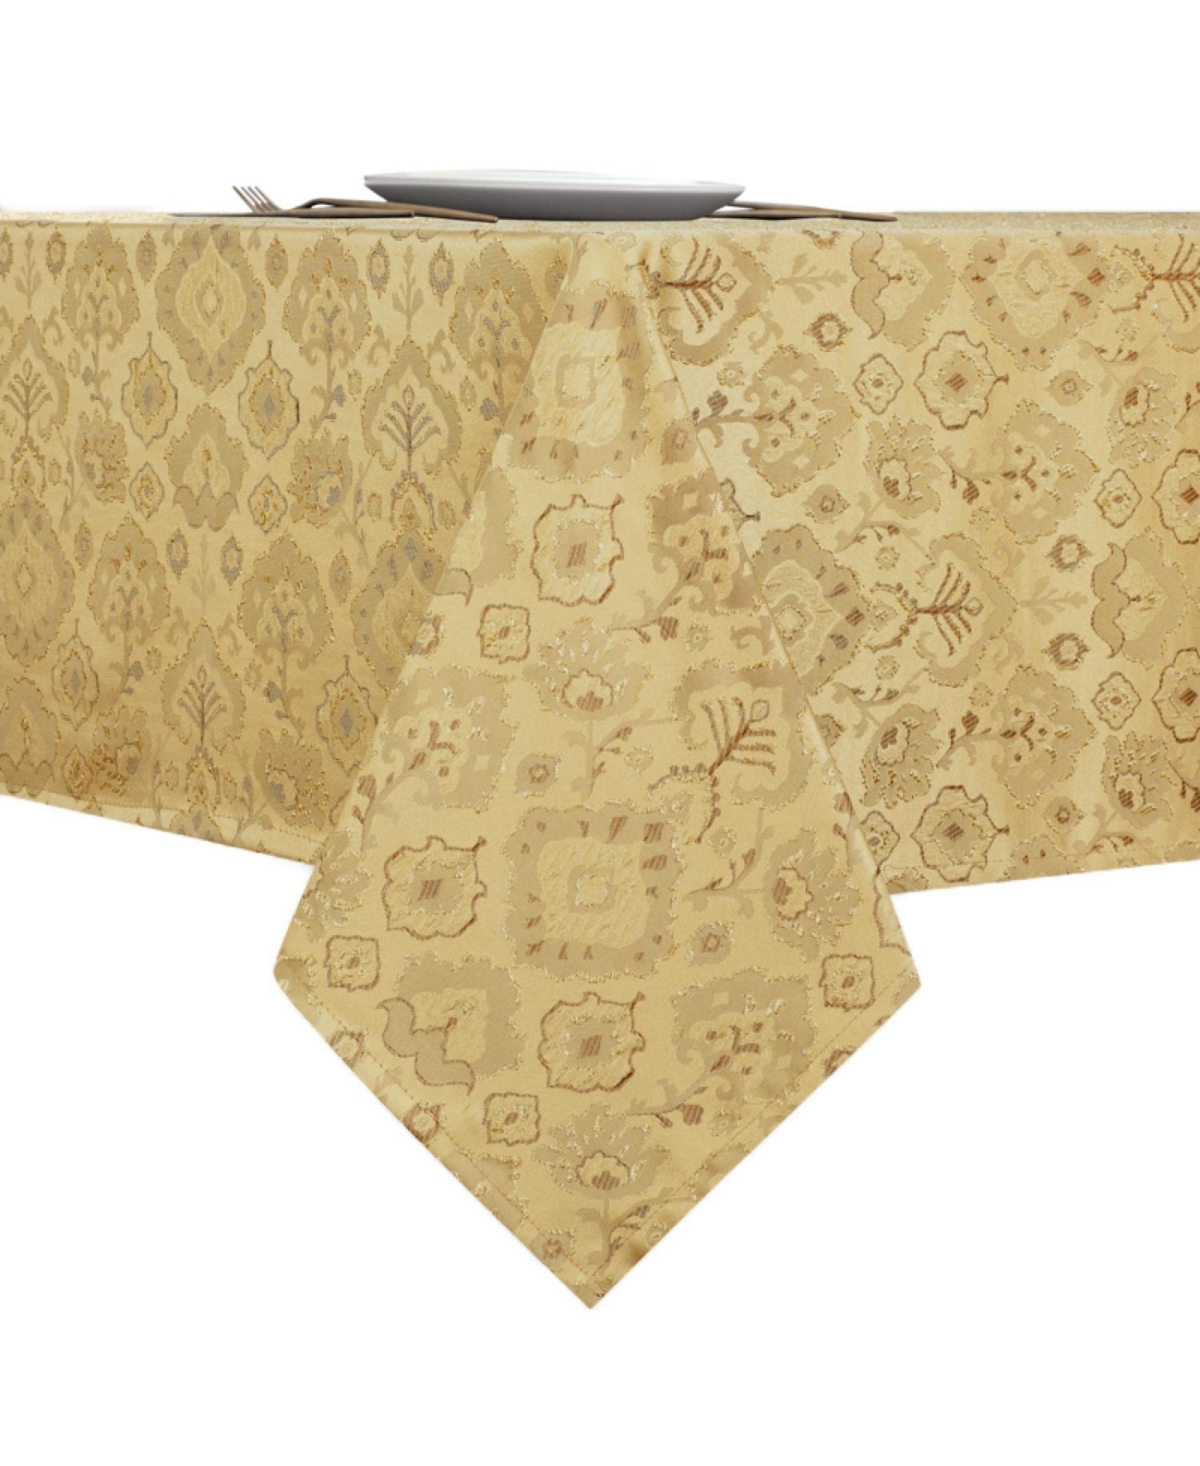 Regency Collection Raised Jacquard Damask Fabric Tablecloth - Beige